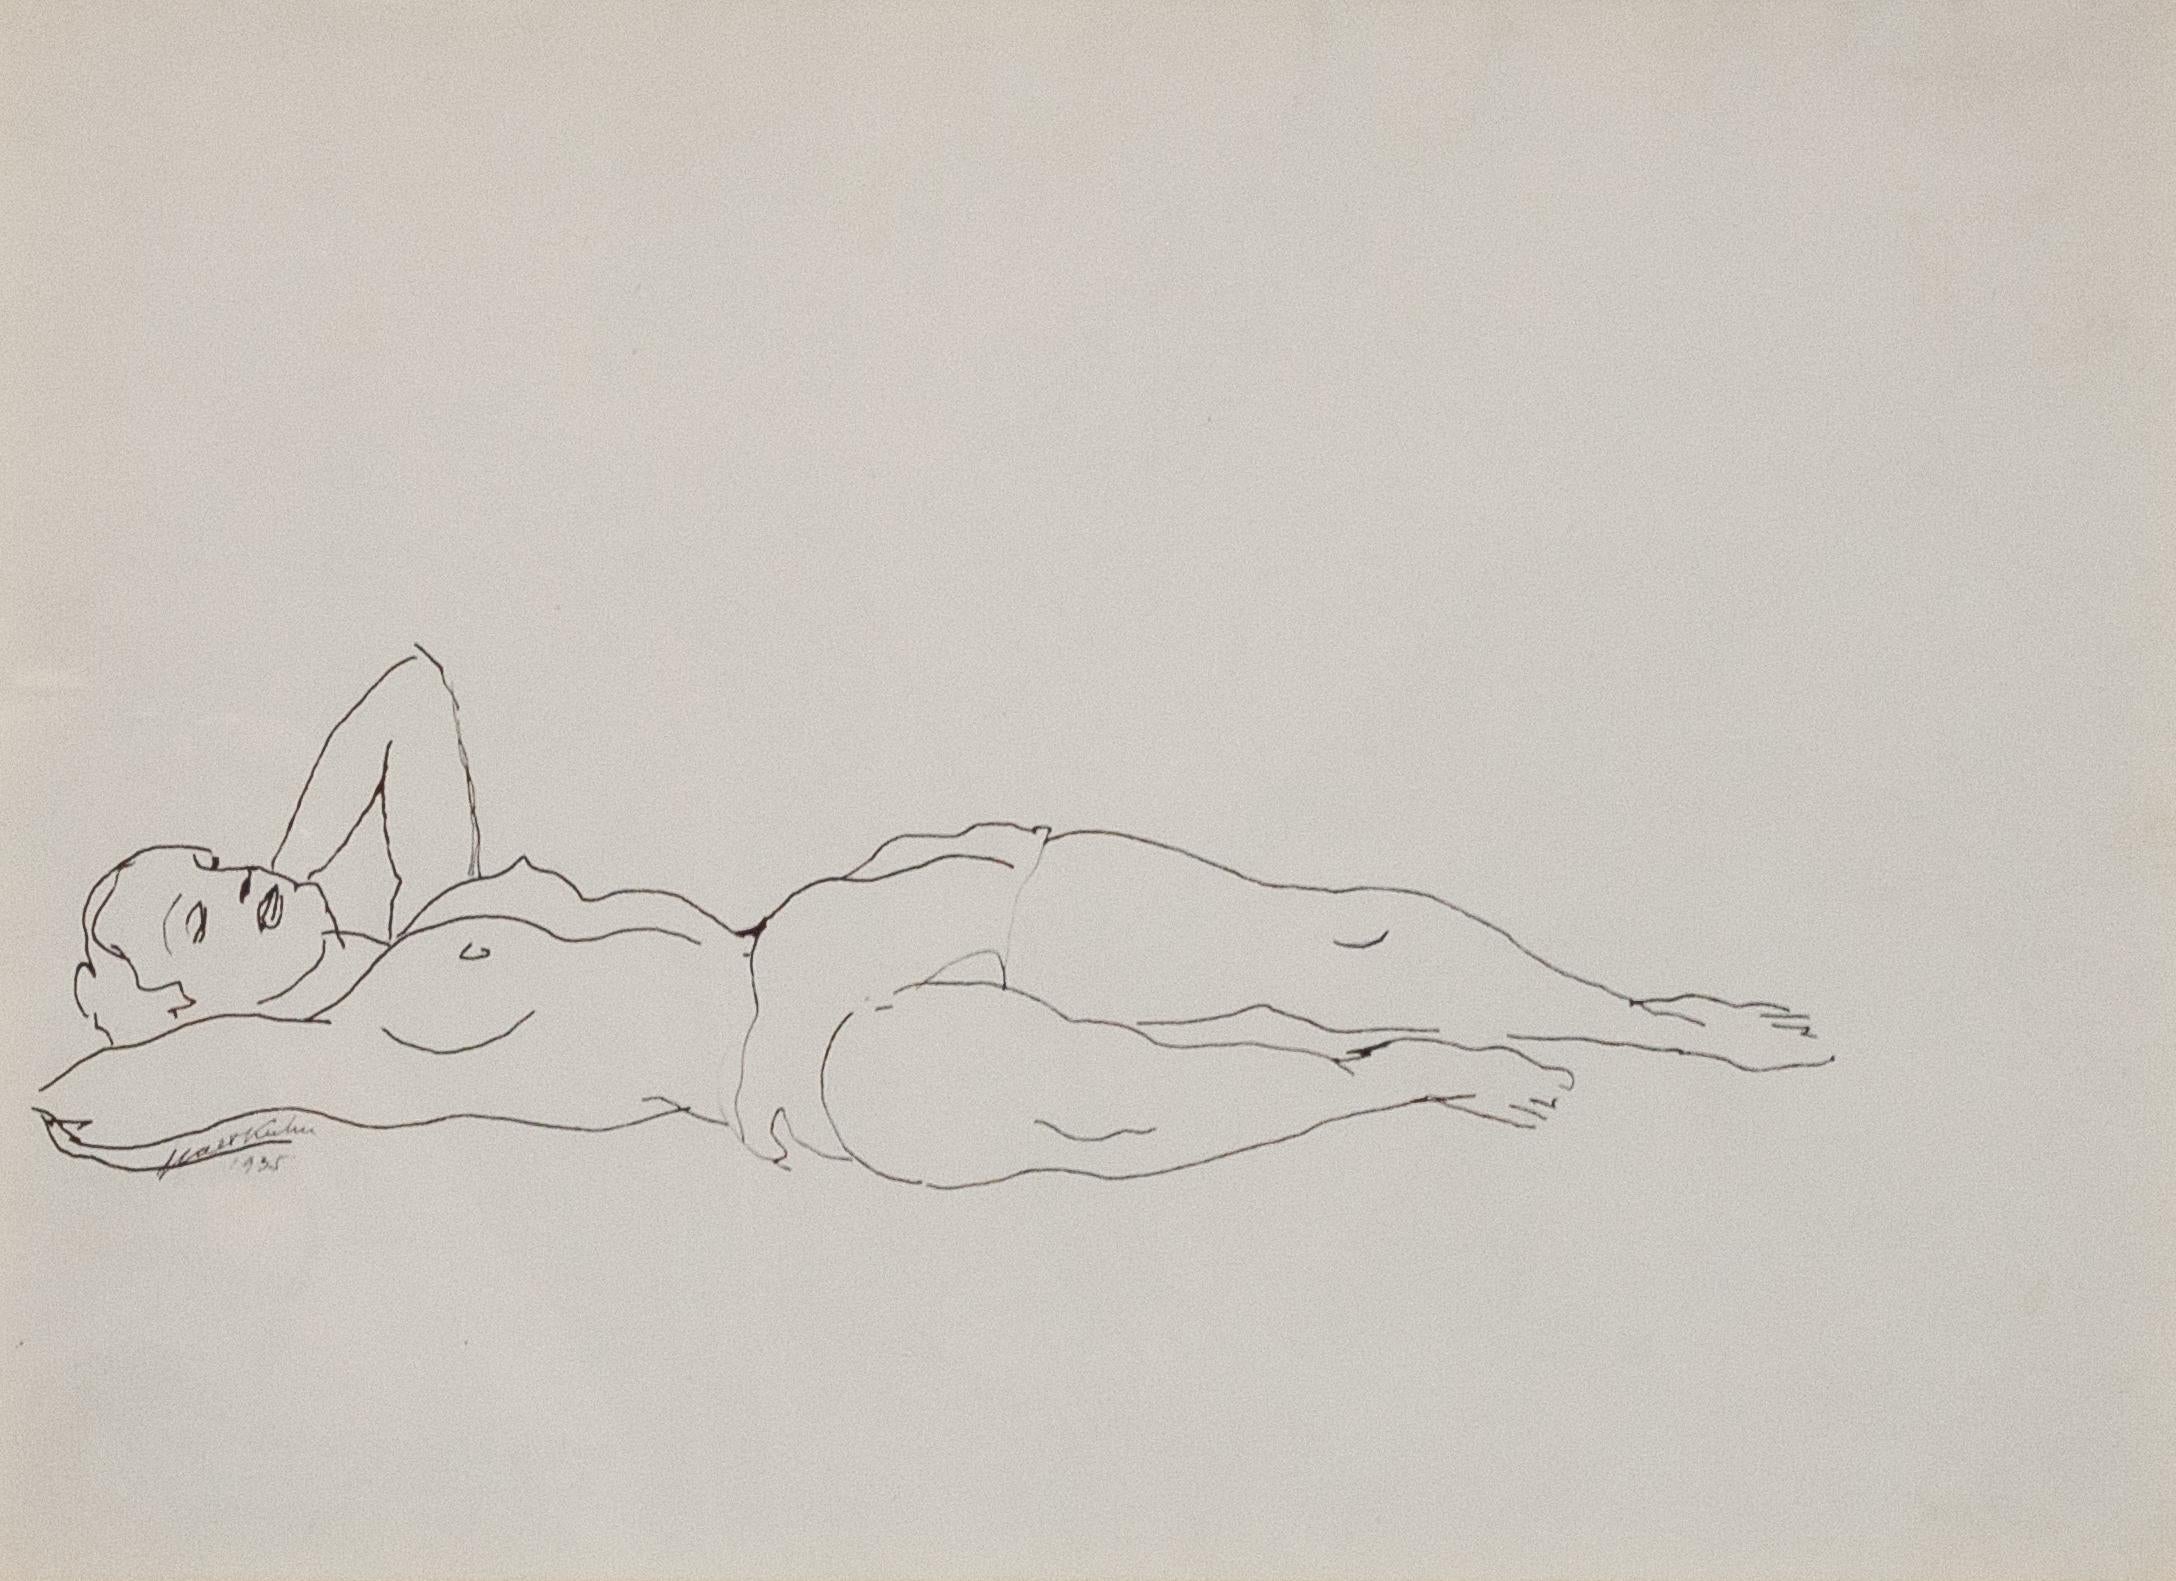 Walt Kuhn
Reclining Figure, 1935
Signed and dated lower left
Pen on paper
Sight 11 x 15 inches

Provenance:
Kennedy Galleries, New York
Spanierman Gallery, New York
Private Collection, New York

Exhibited:
New York, Kennedy Galleries, Walt Kuhn,